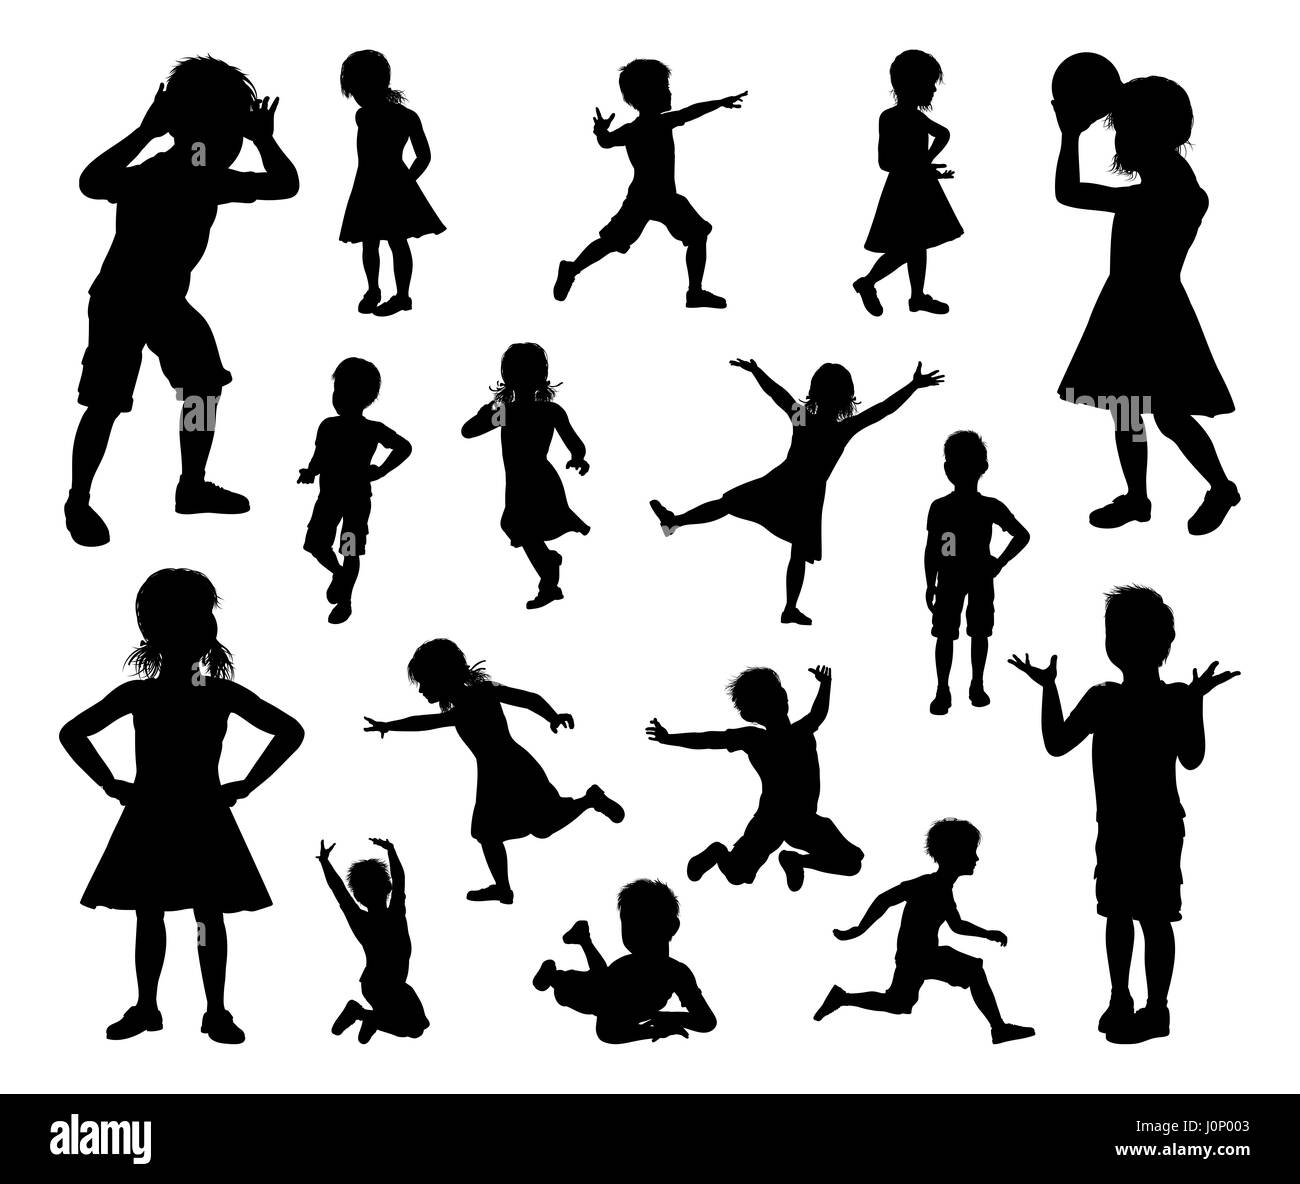 A set of kids or children in silhouette playing, running and jumping and other poses Stock Photo